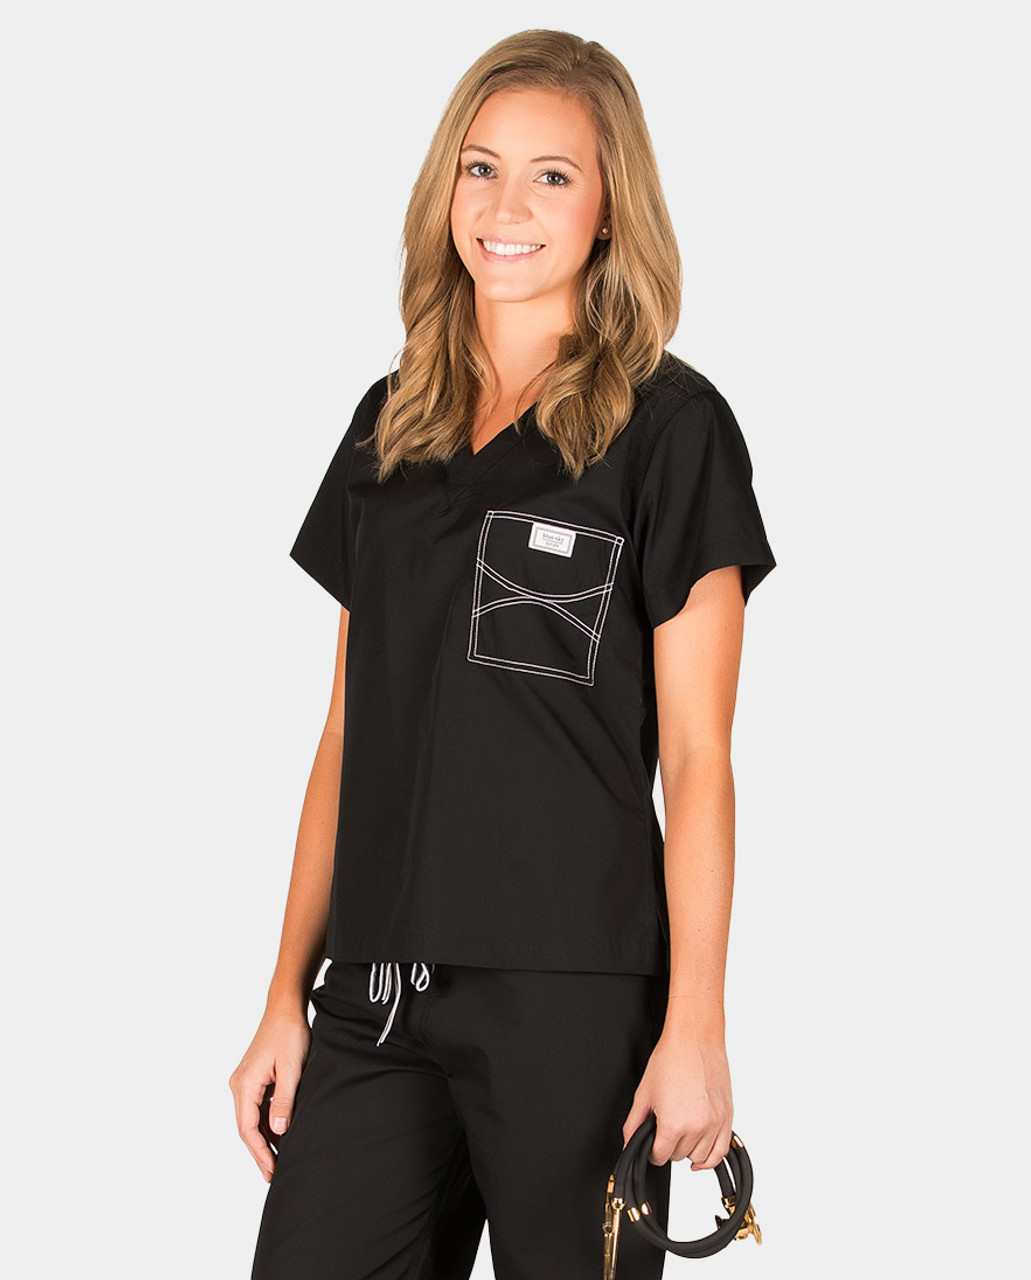 Classic Shelby Scrub Tops for Women